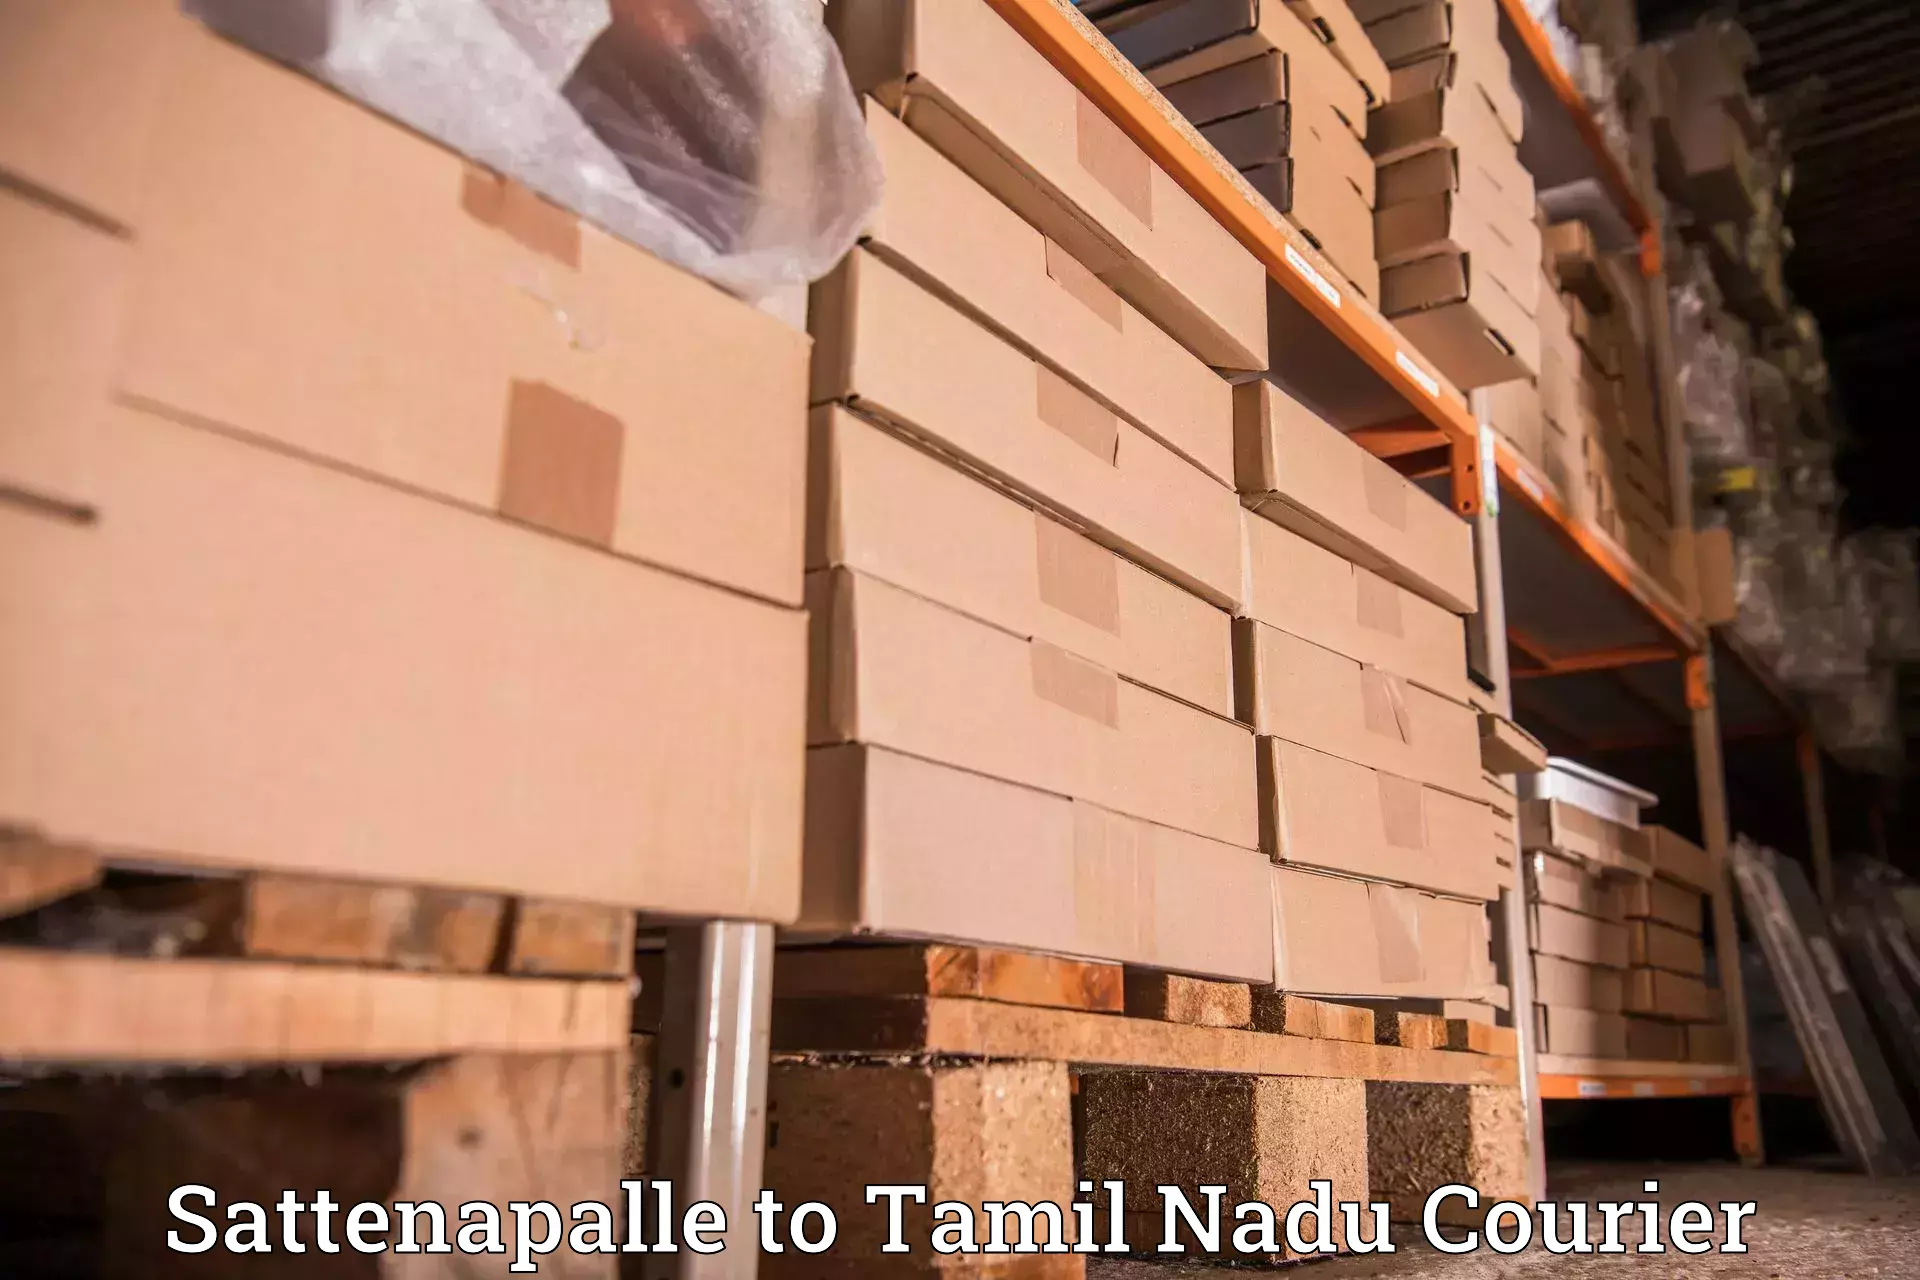 Courier service innovation Sattenapalle to Pushpavanam